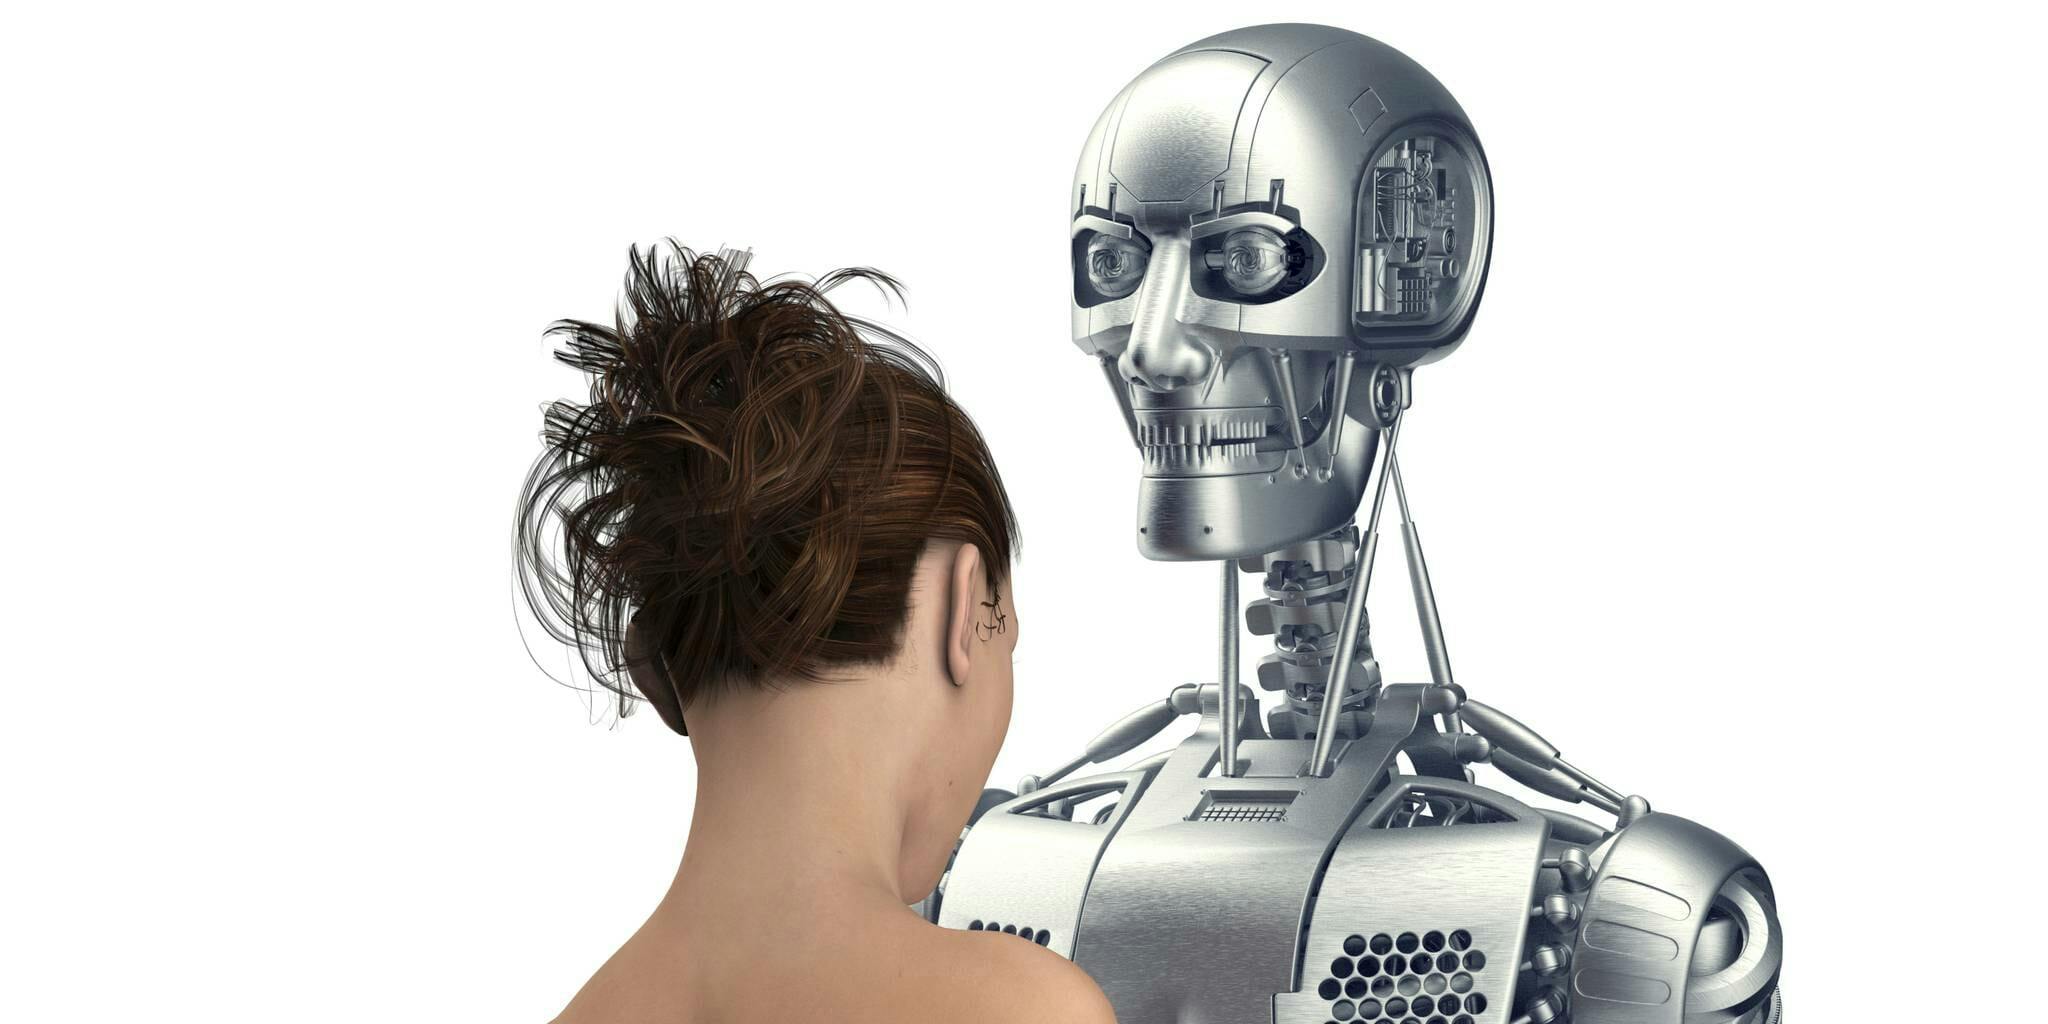 Www 2050 Sex Com - Of course we'll all be having sex with robots by 2050 - The Daily Dot